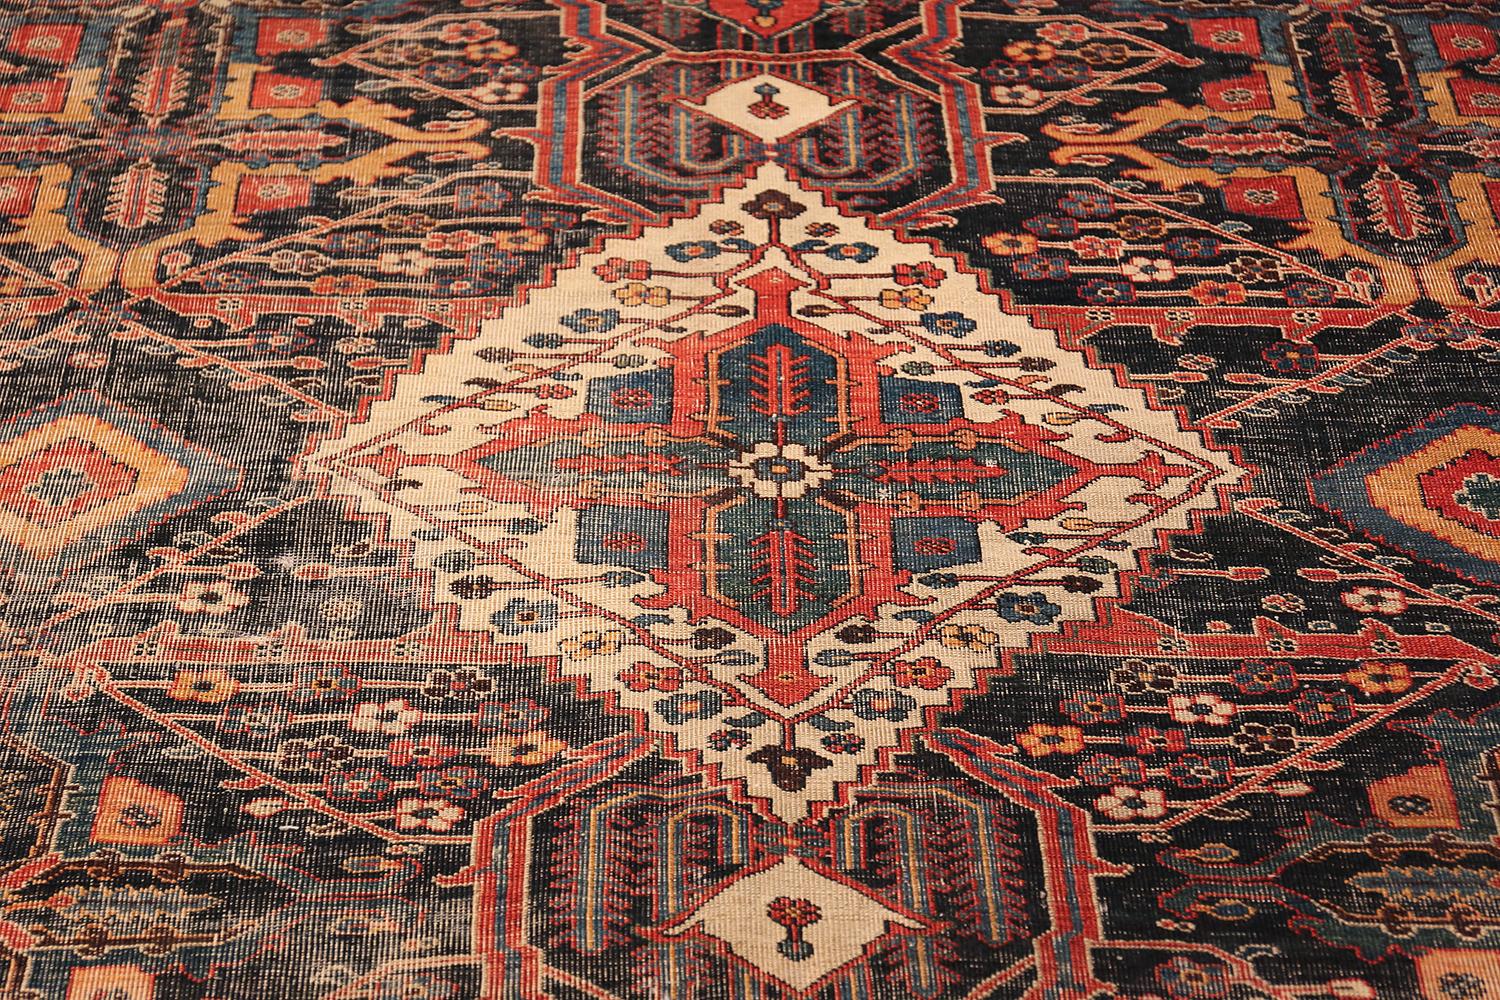 Hand-Knotted Antique Tribal Persian Bakhtiari Shabby Chic Rug. Size: 7 ft x 14 ft 3 in